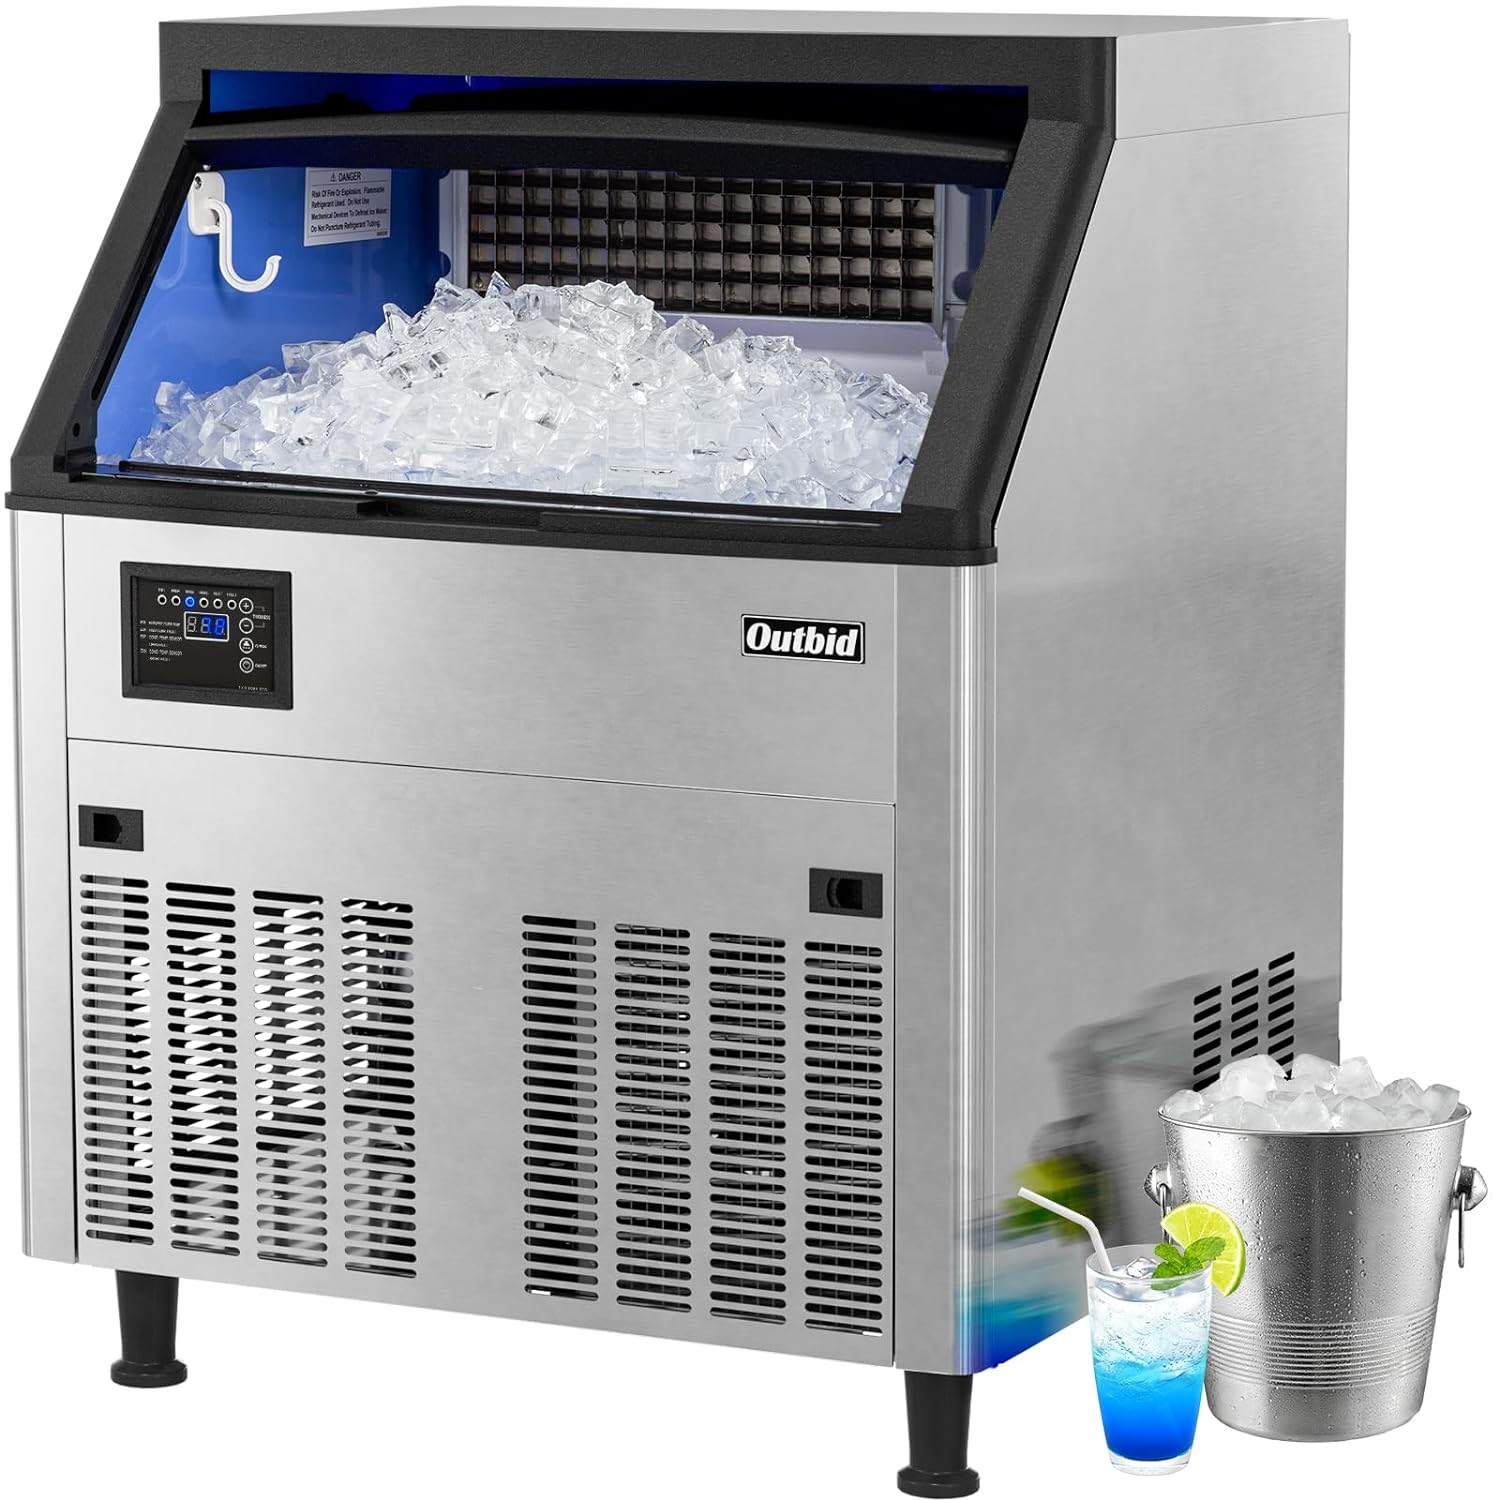 Outbid Air Cooled Food-Grade Stainless Steel Commercial Ice Maker Machine. 